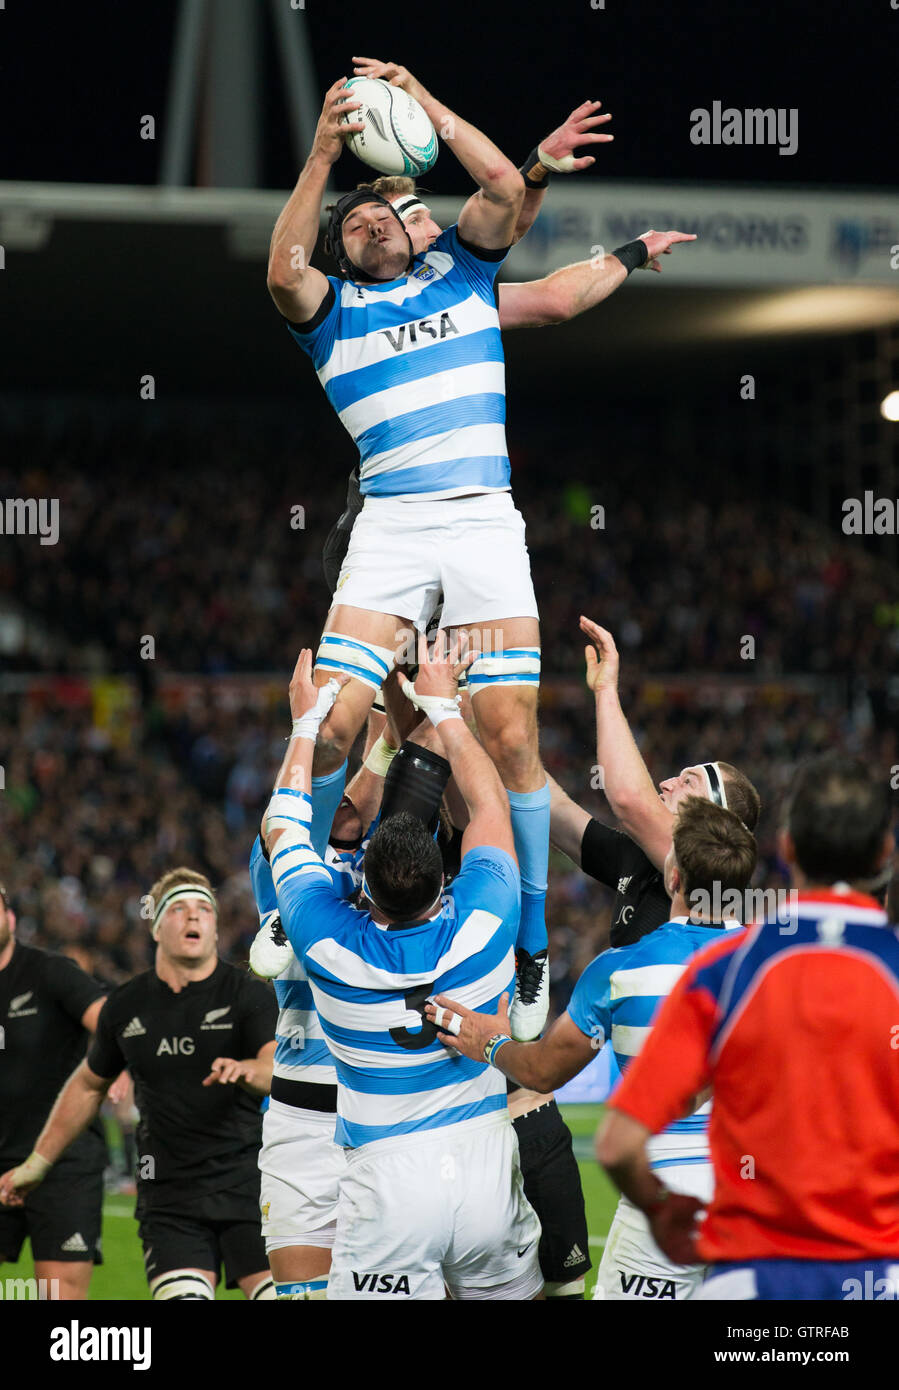 Hamilton, New Zealand. 10th Sep, 2016. The Rugby Championship, New All Blacks versus Argentina Pumas. captain Read goes high in a lineout but loses possession during the Credit: Action